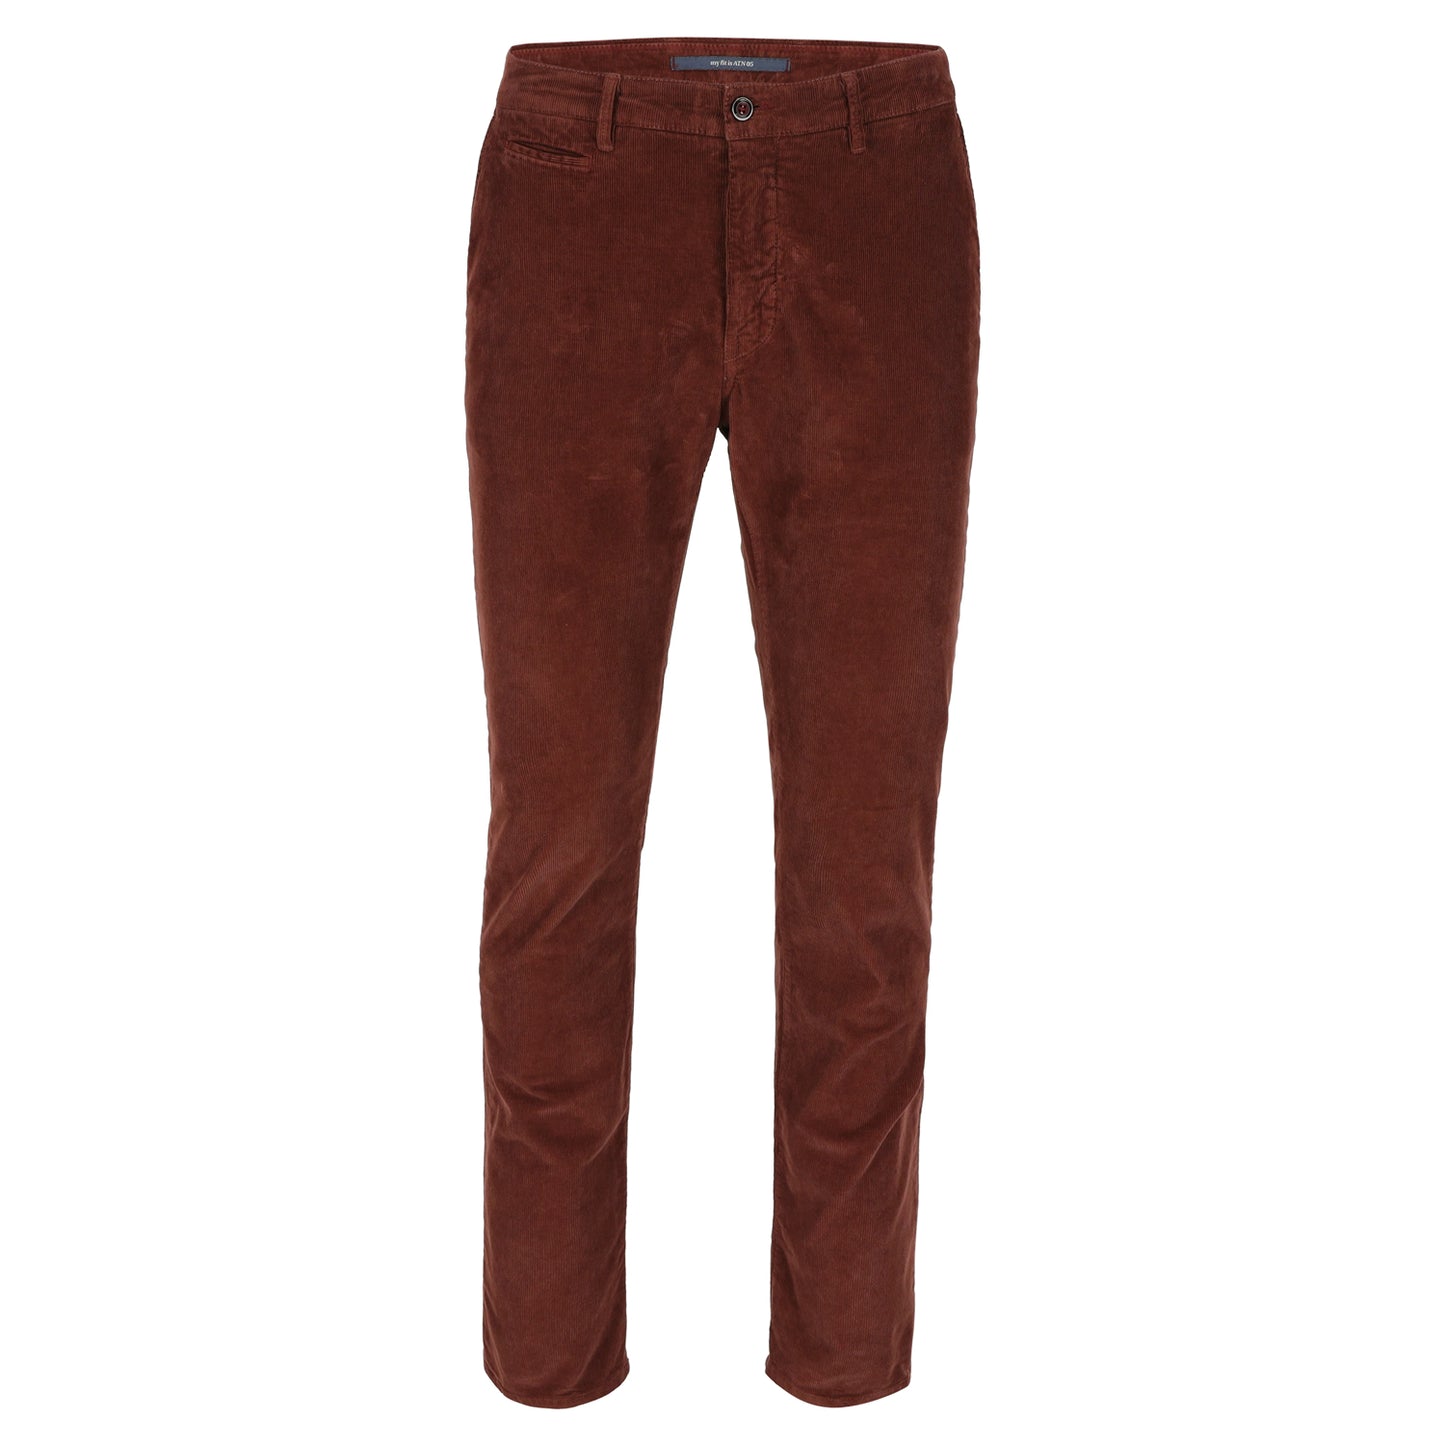 Cherry red corduroy slim fit trousers Atelier Noterman - 1585/406